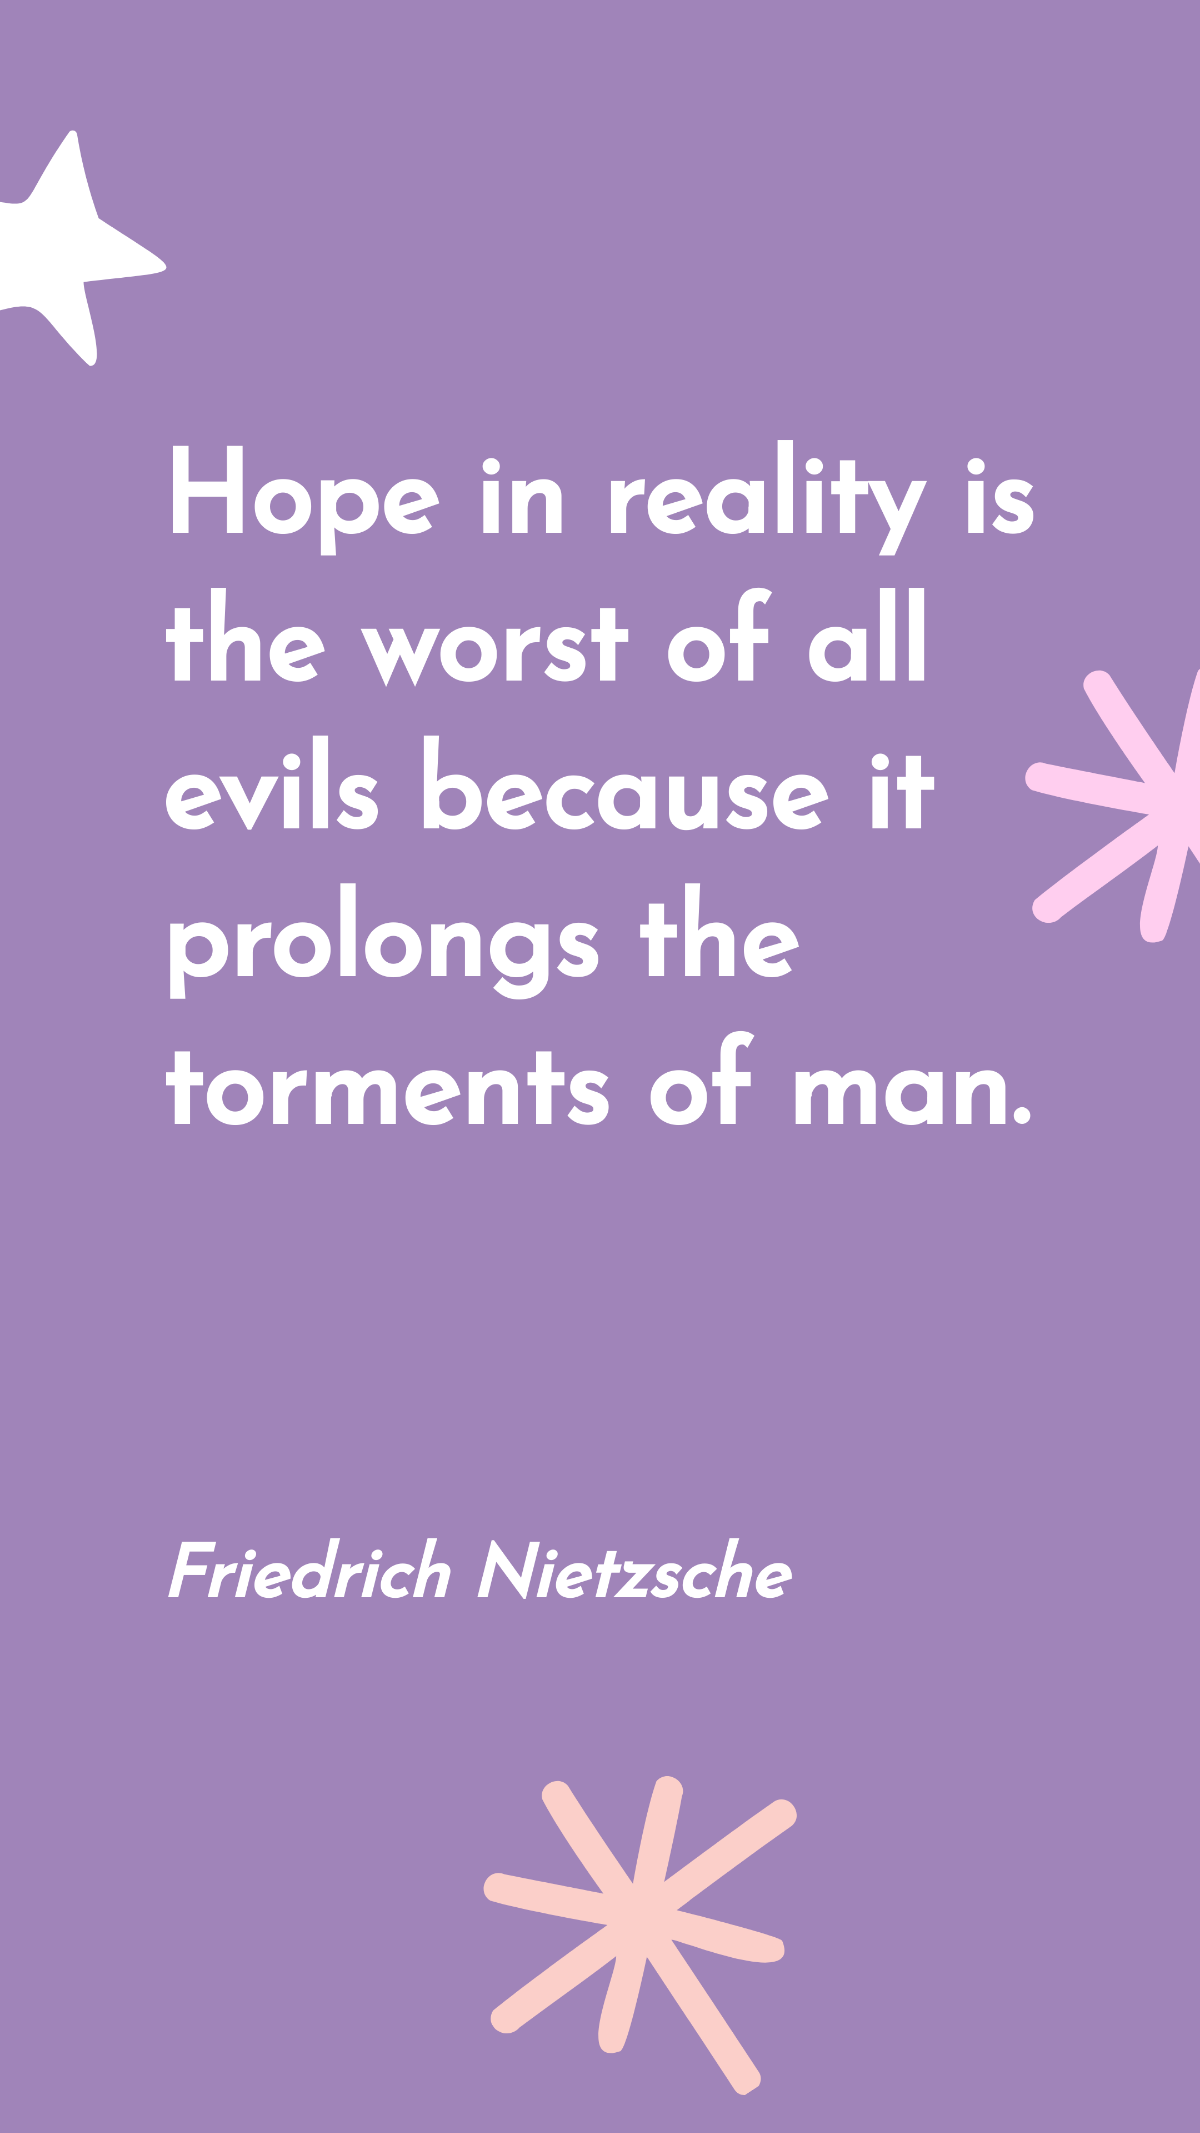 Free Friedrich Nietzsche - Hope in reality is the worst of all evils because it prolongs the torments of man. Template